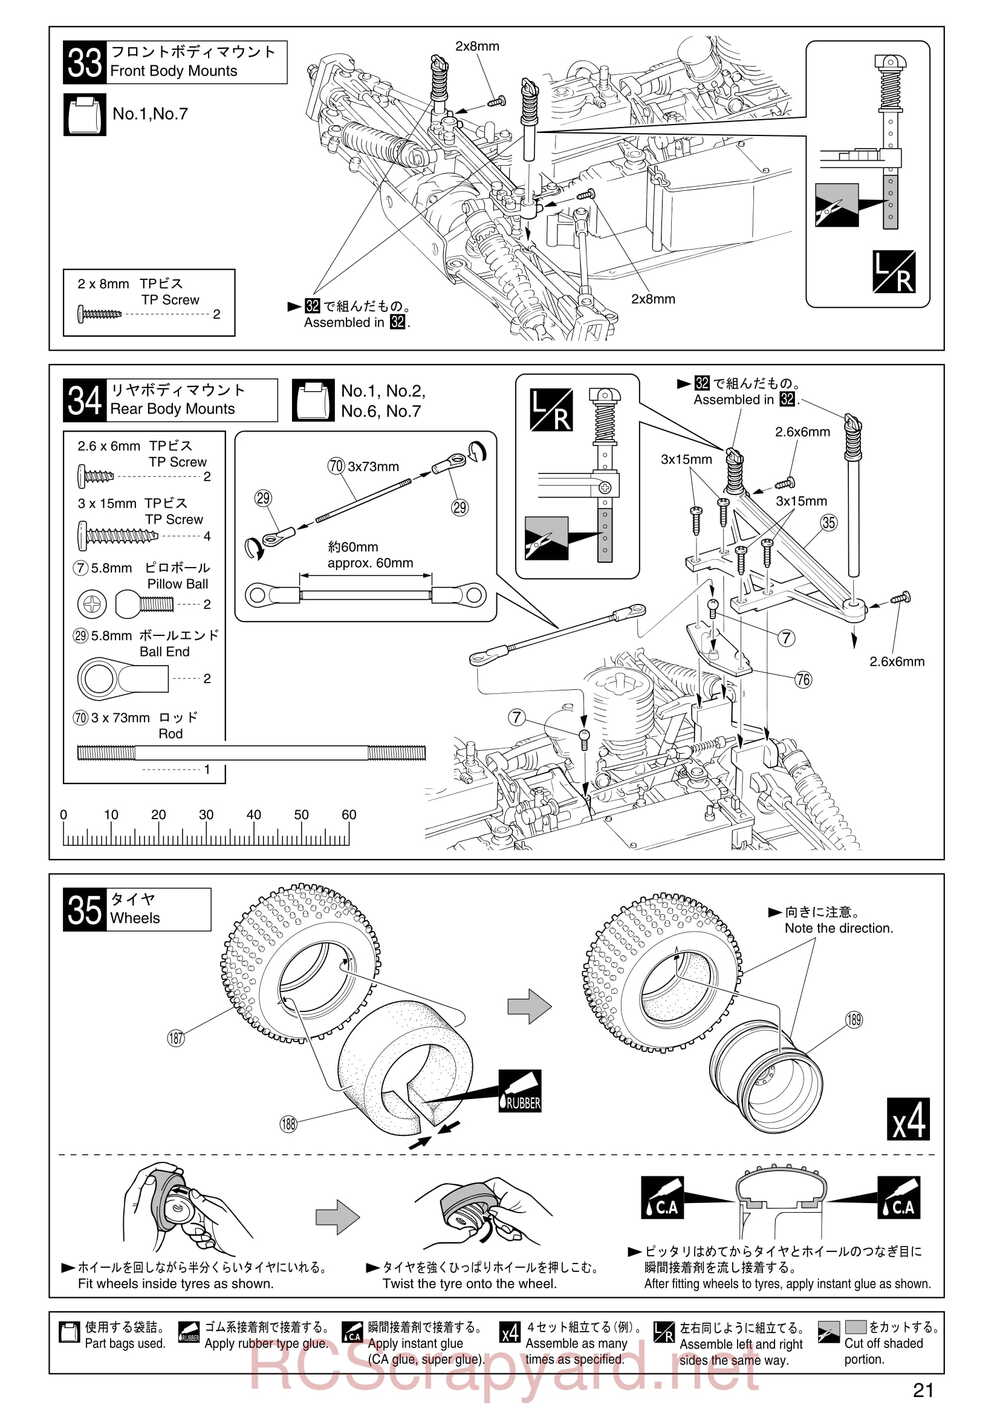 Kyosho - 31213 - TR-15 Monster-Touring - Manual - Page 21